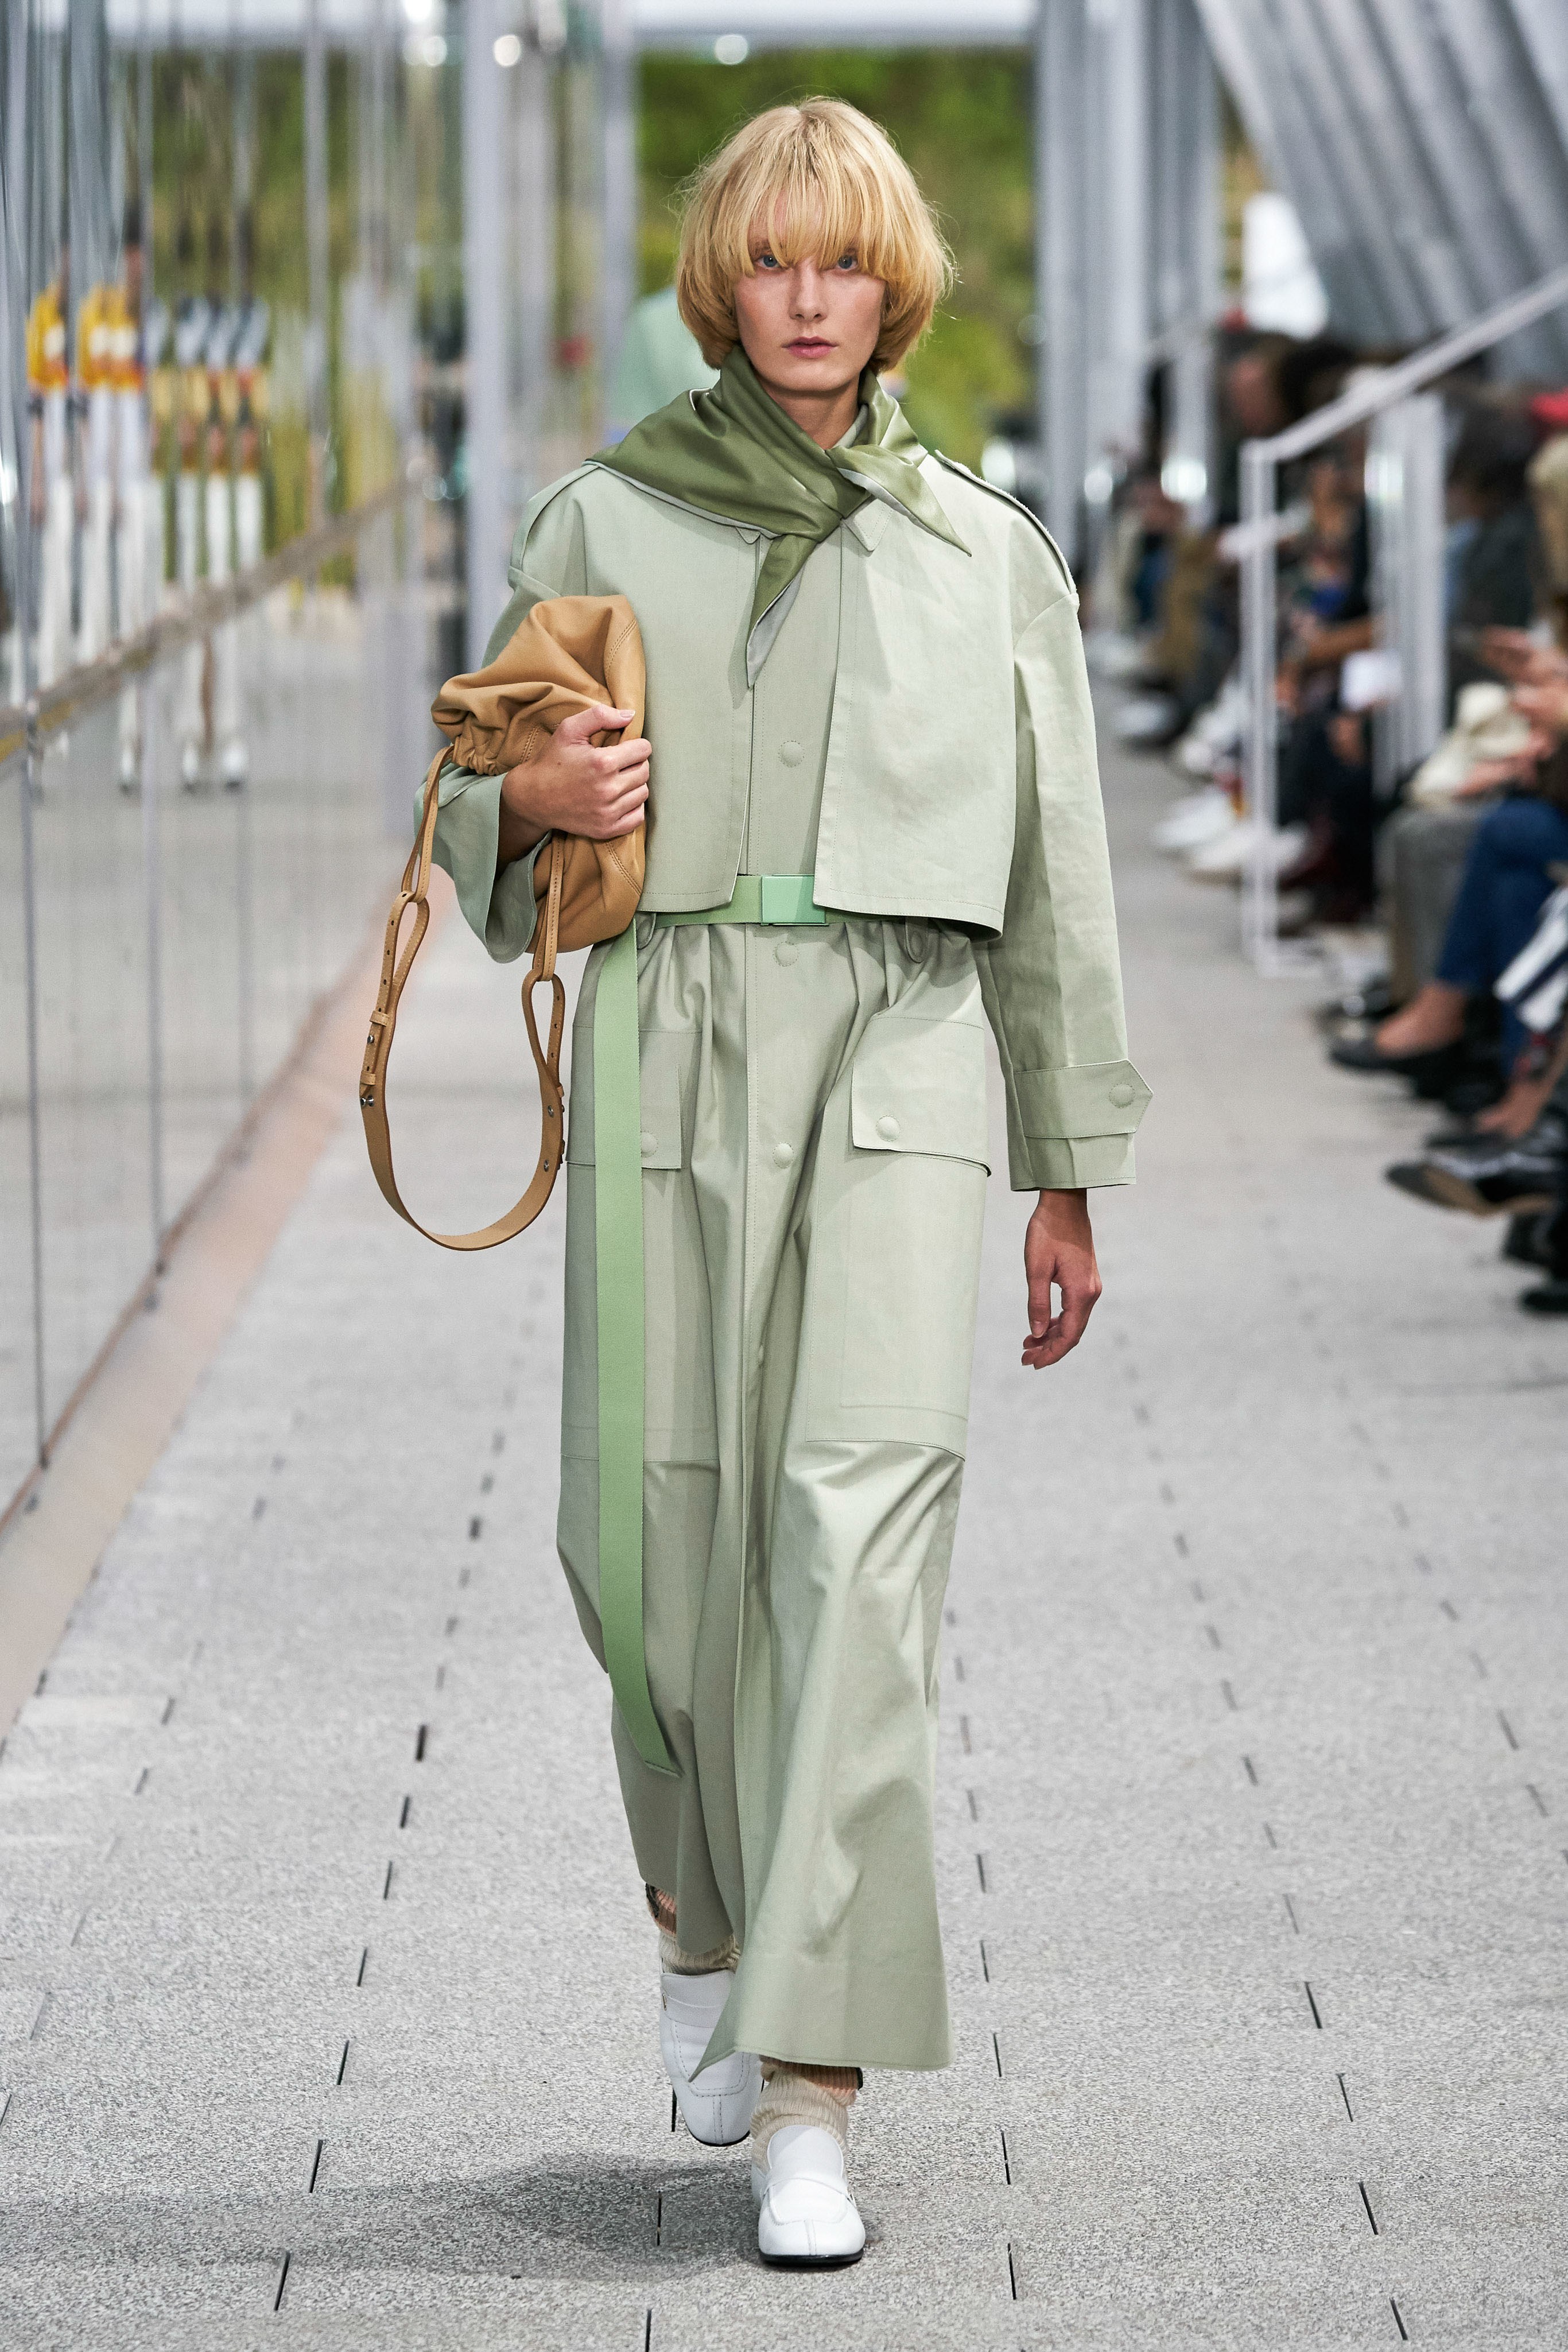 Lacoste Spring Summer 2020 SS2020 trends runway coverage Ready To Wear Vogue scarf